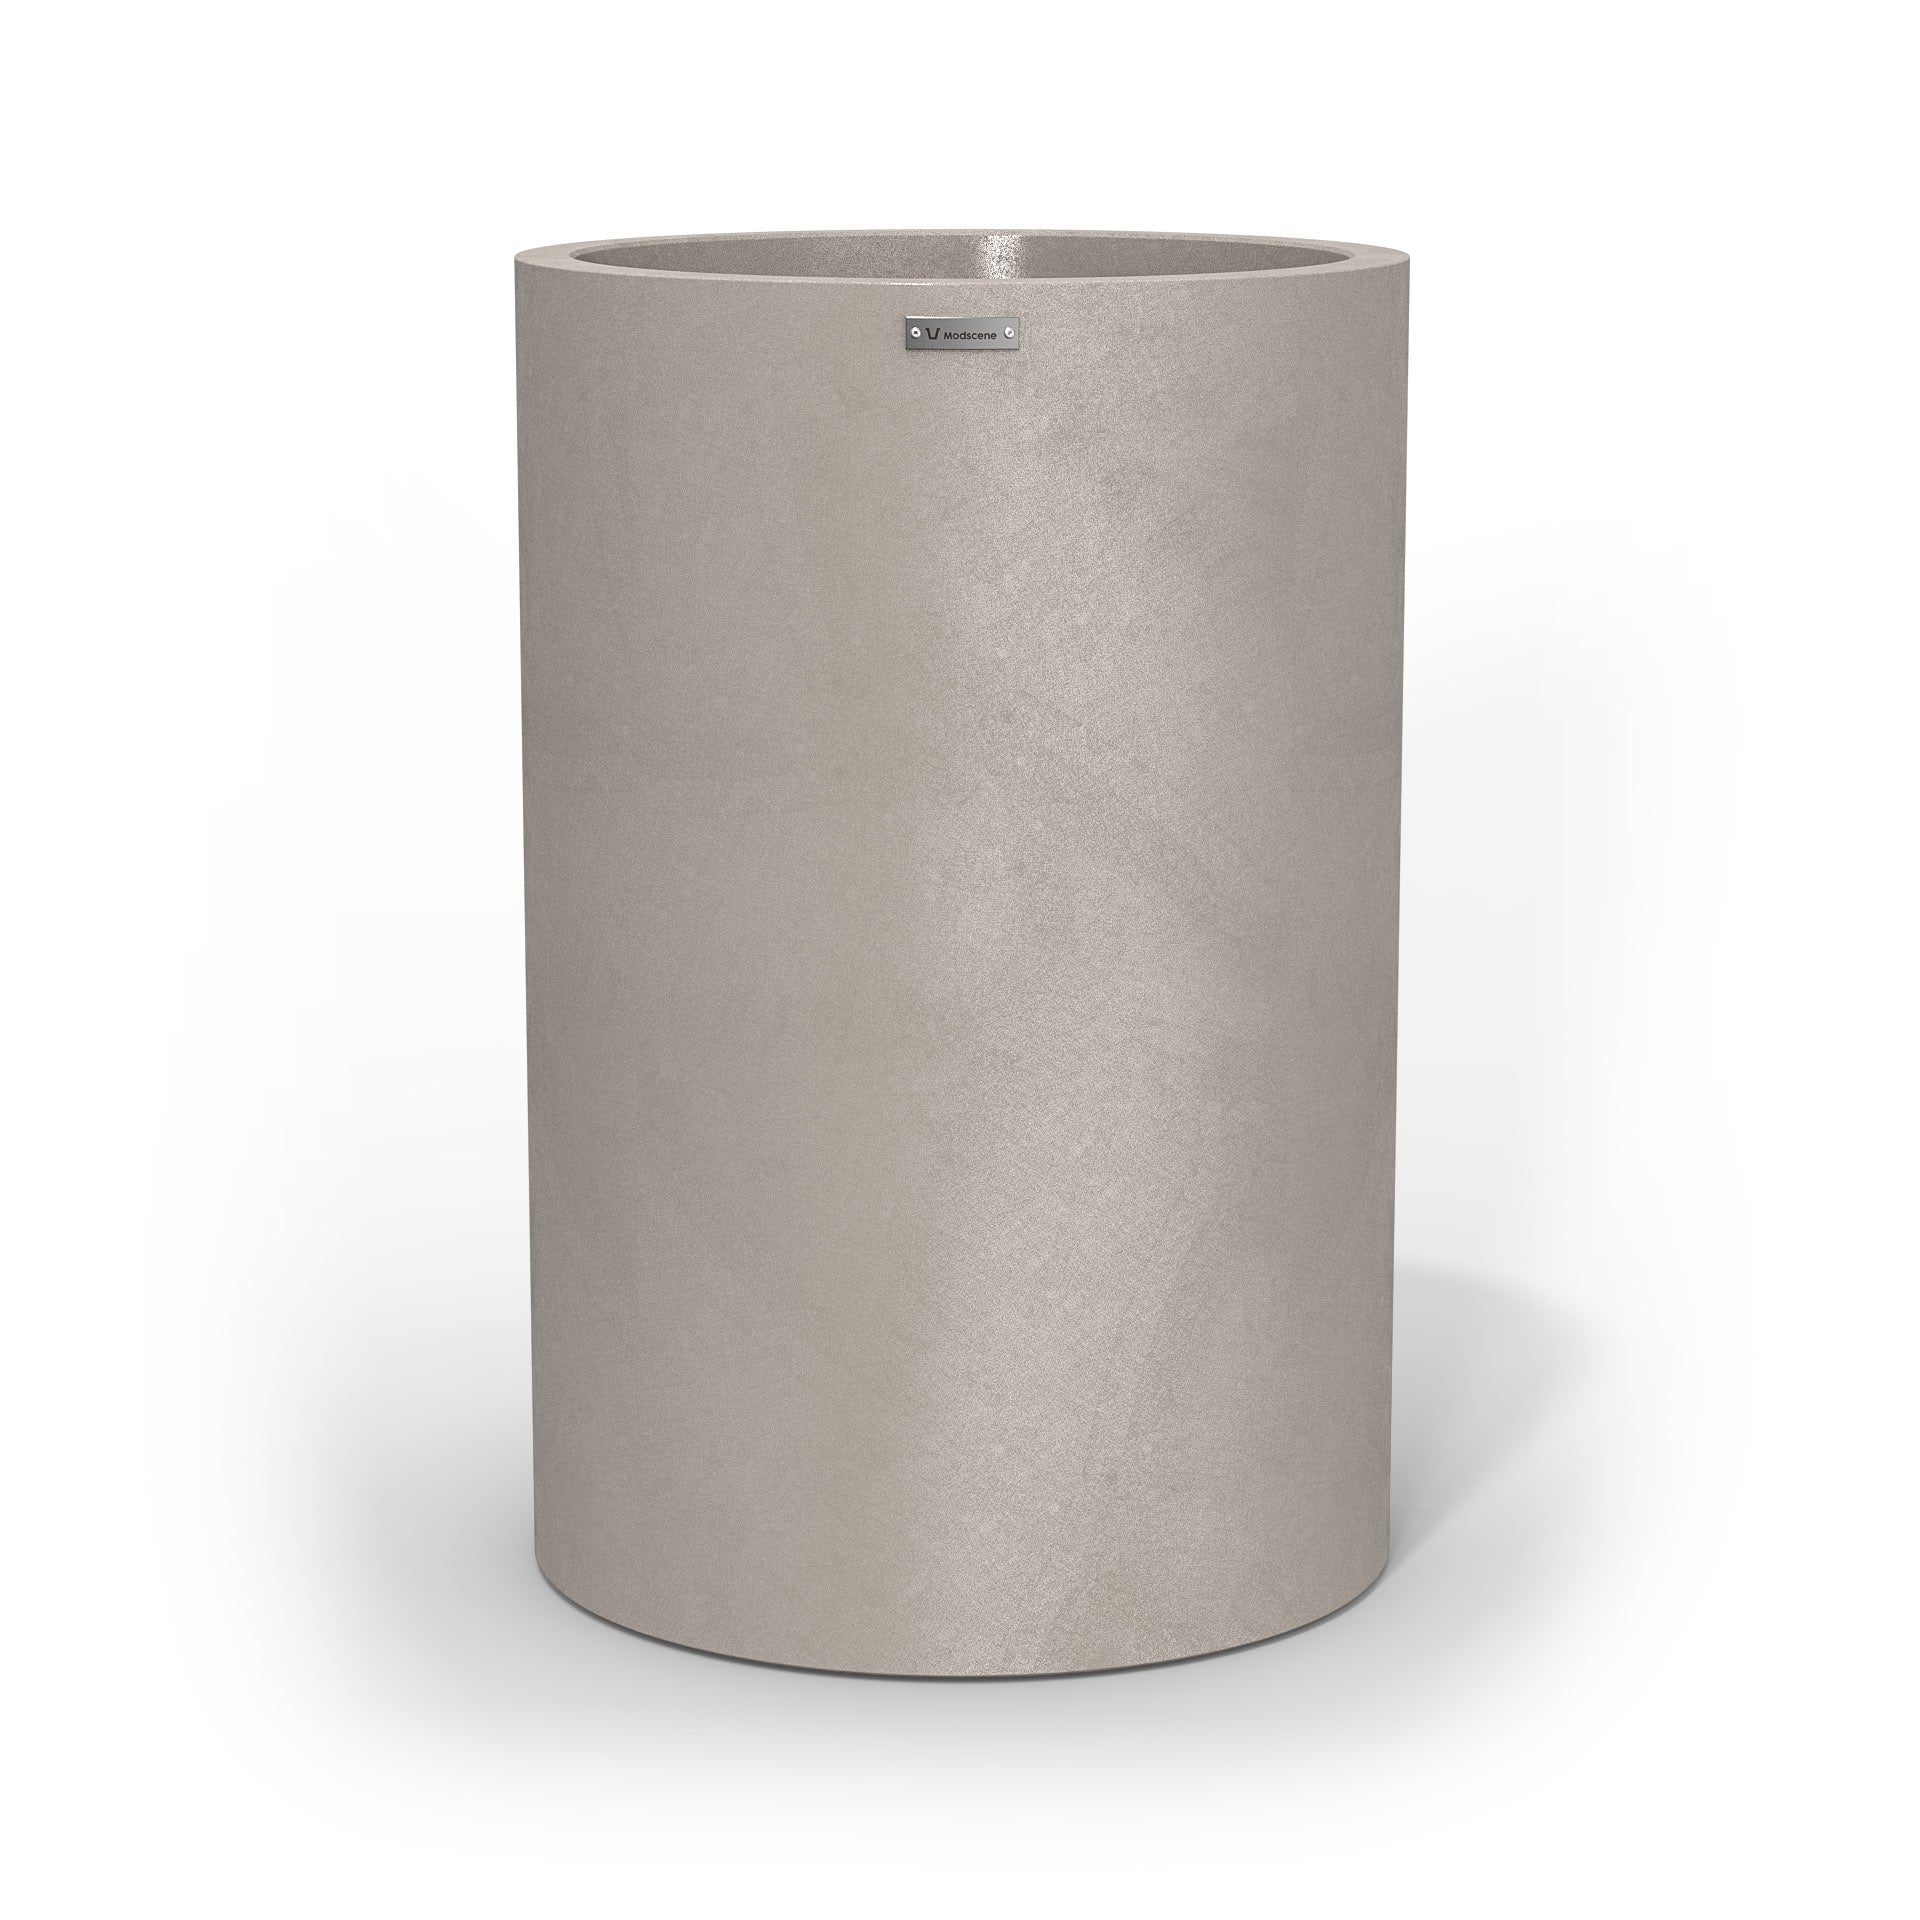 A tall brown cylinder shaped planter pot by Modscene New Zealand.